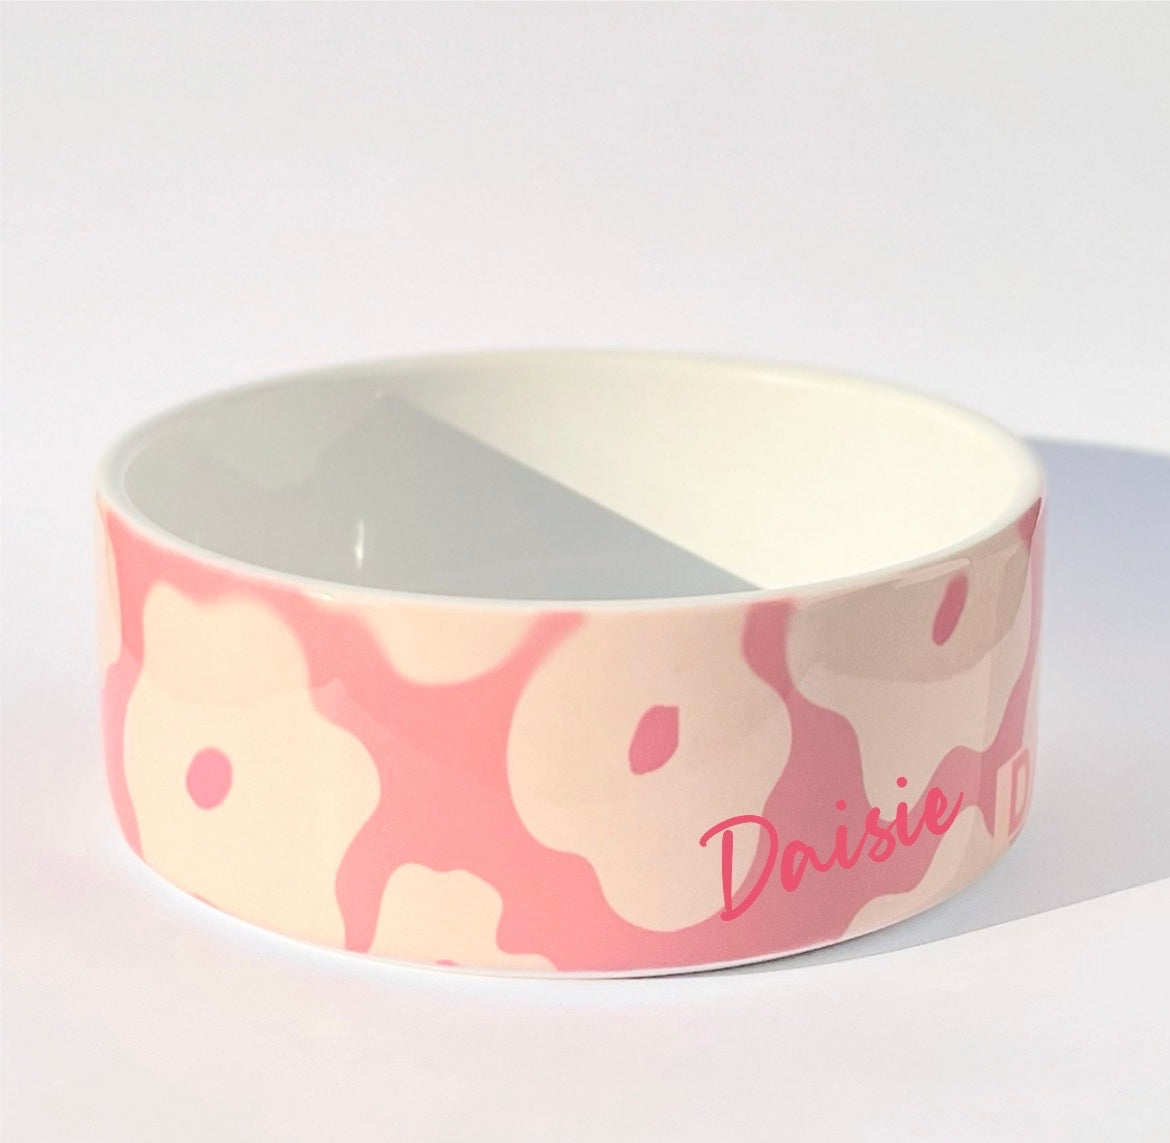 Personalised Ceramic Pet Bowl - Add your pets name - 2 sizes